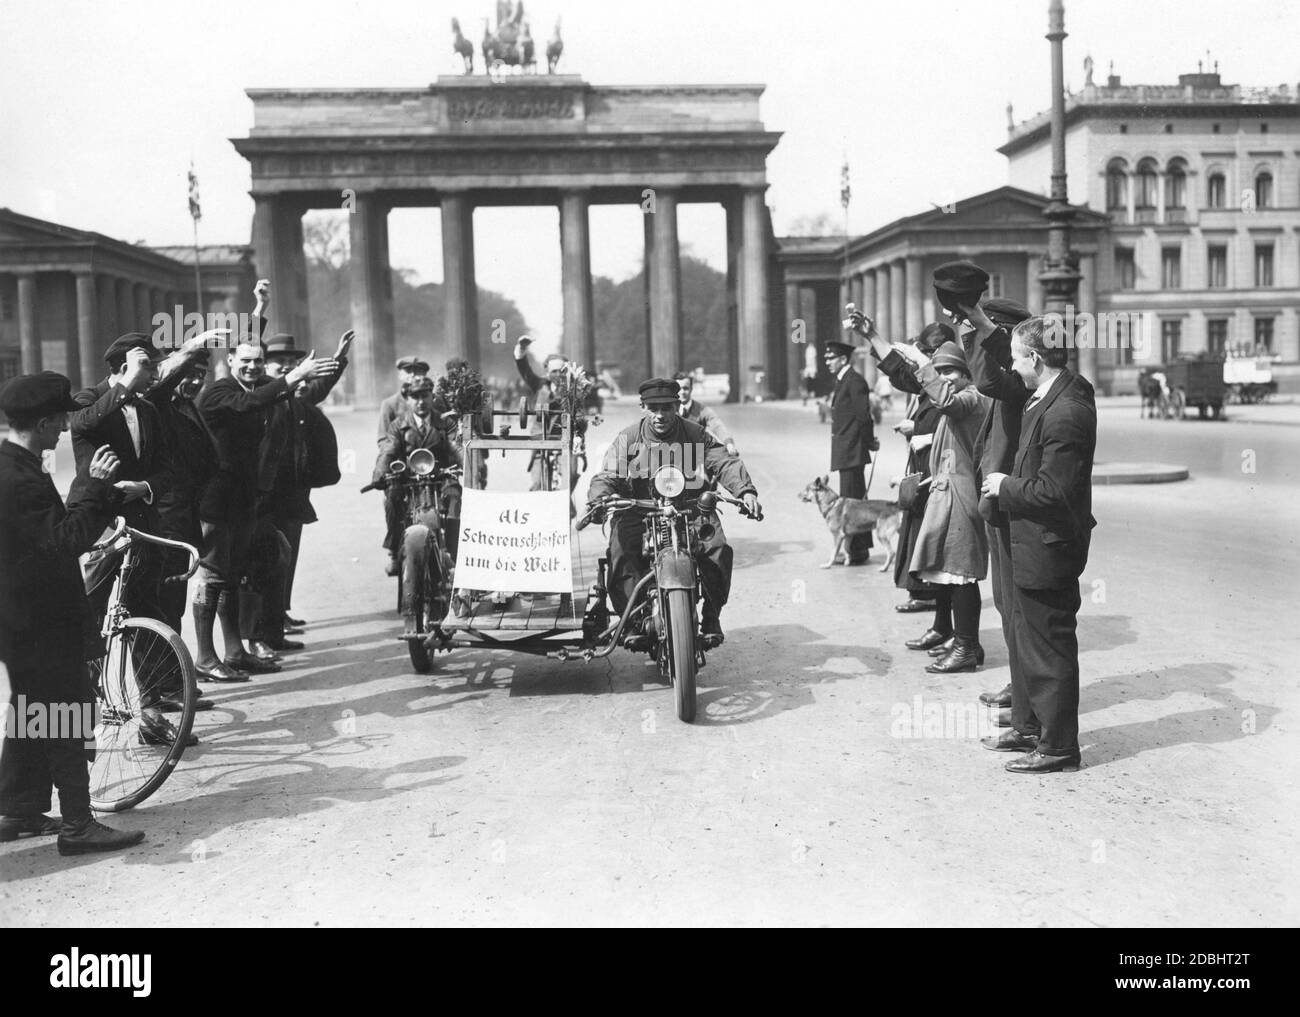 'On a Tuesday in 1928, Alfred Vollmann from Neukoelln set off on a trip around the world from the Brandenburg Gate in Berlin. The scissors grinder wanted to complete this journey with his motorcycle and grinding stone. On the motorcycle hangs a poster with the inscription ''Around the world as a scissors grinder''. On the photo he is saying goodbye.' Stock Photo